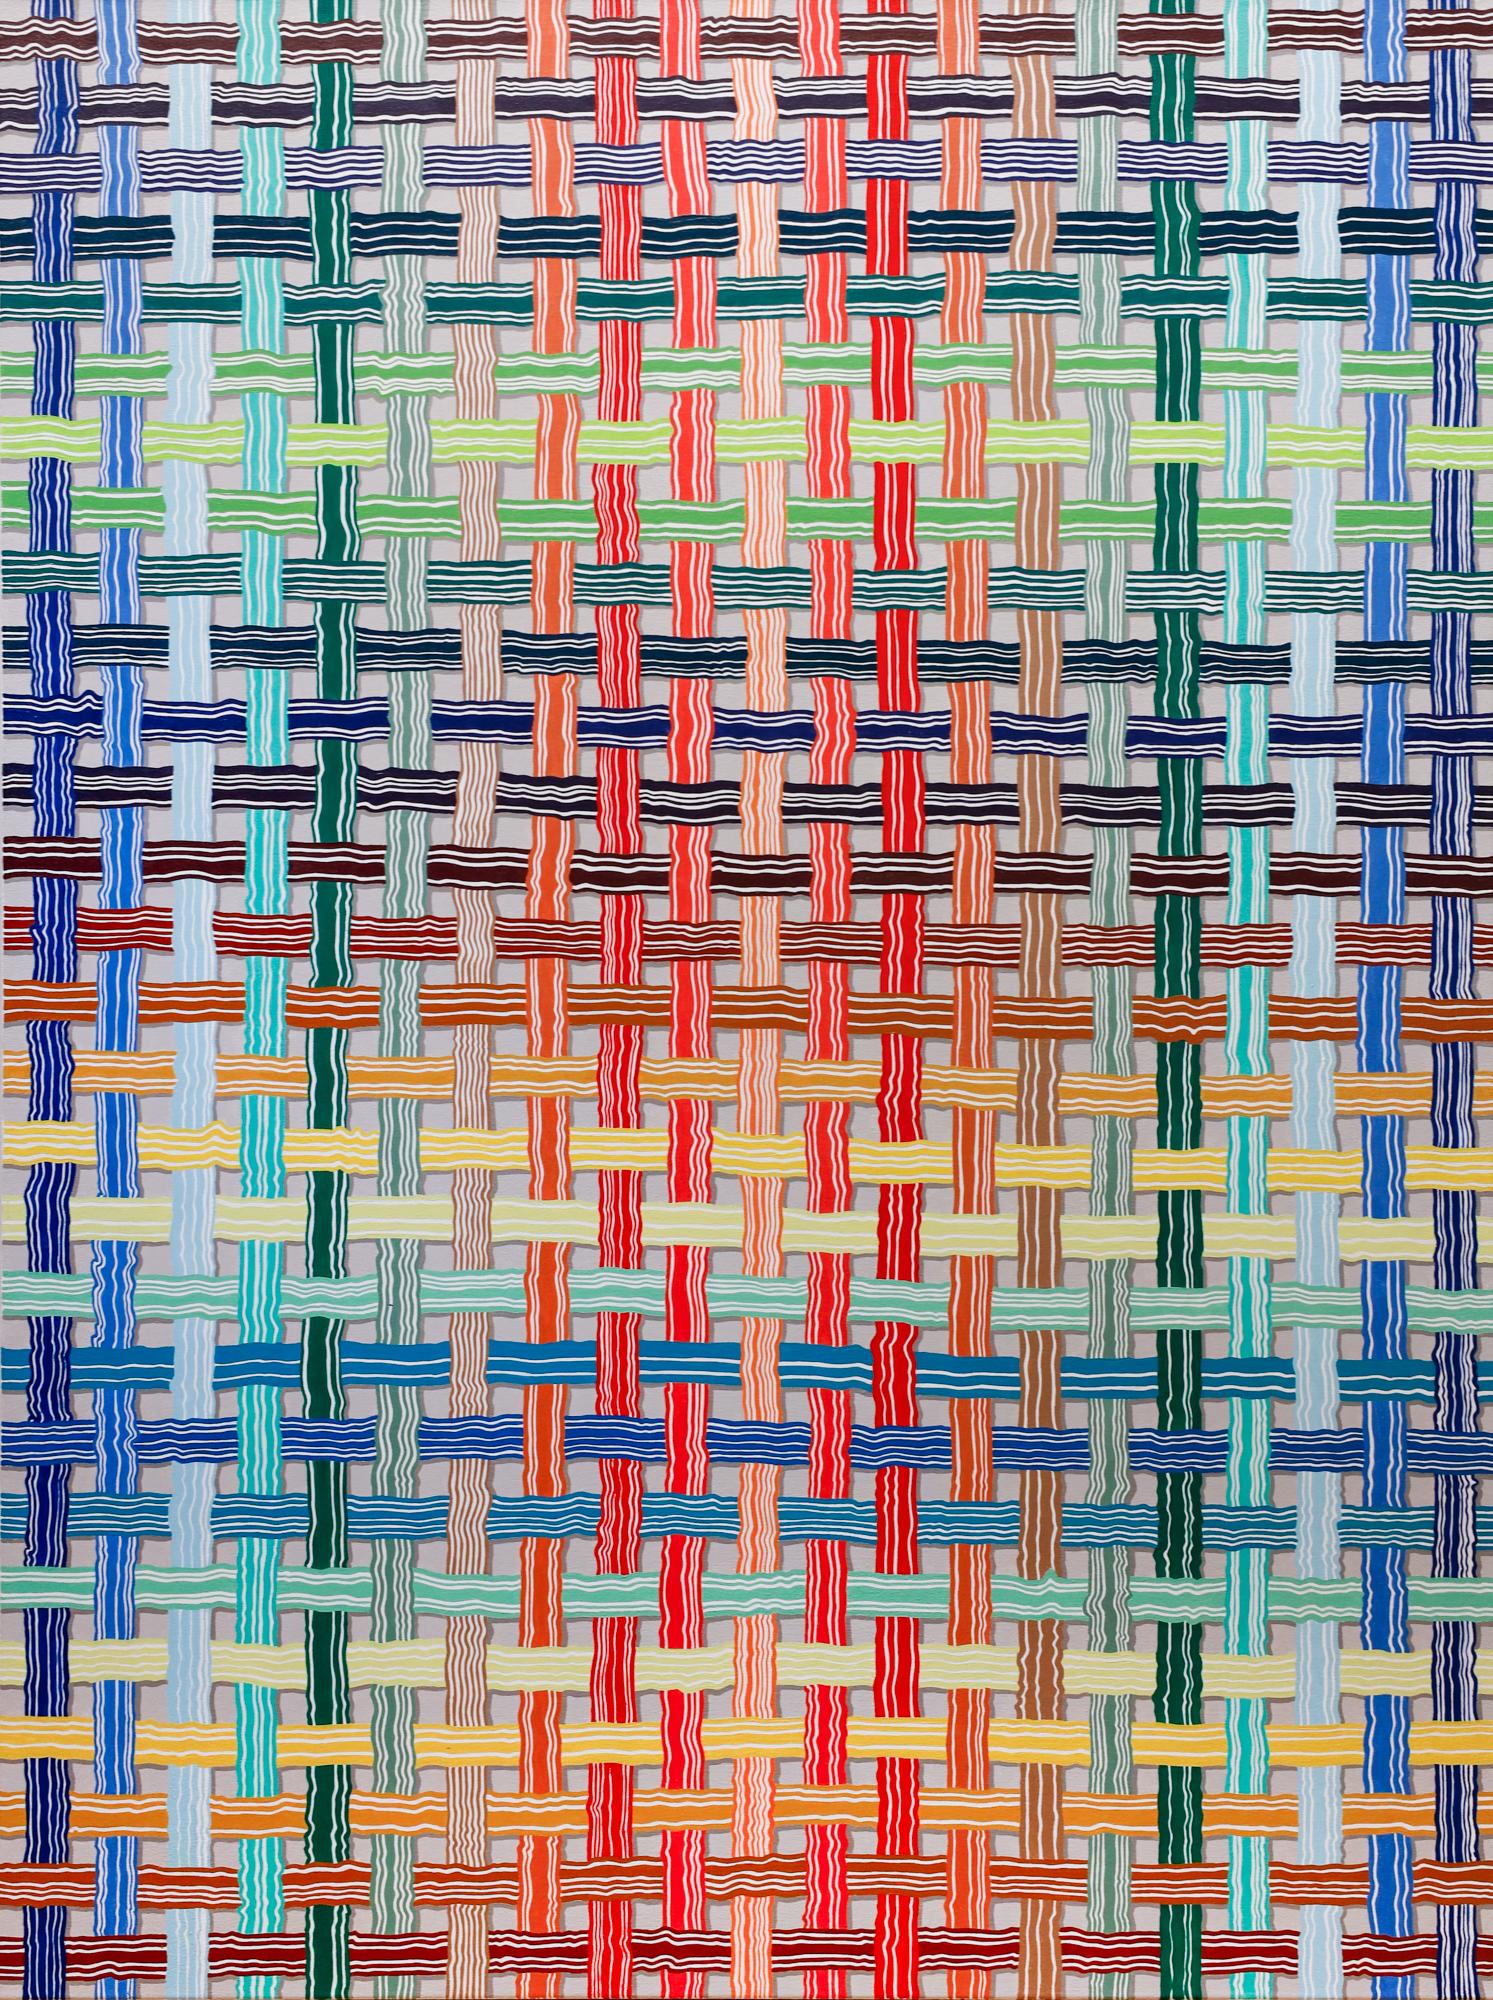 Jason Andrew Turner Abstract Painting - "If There Was Time" grid, abstract brushstroke pattern, multicolored